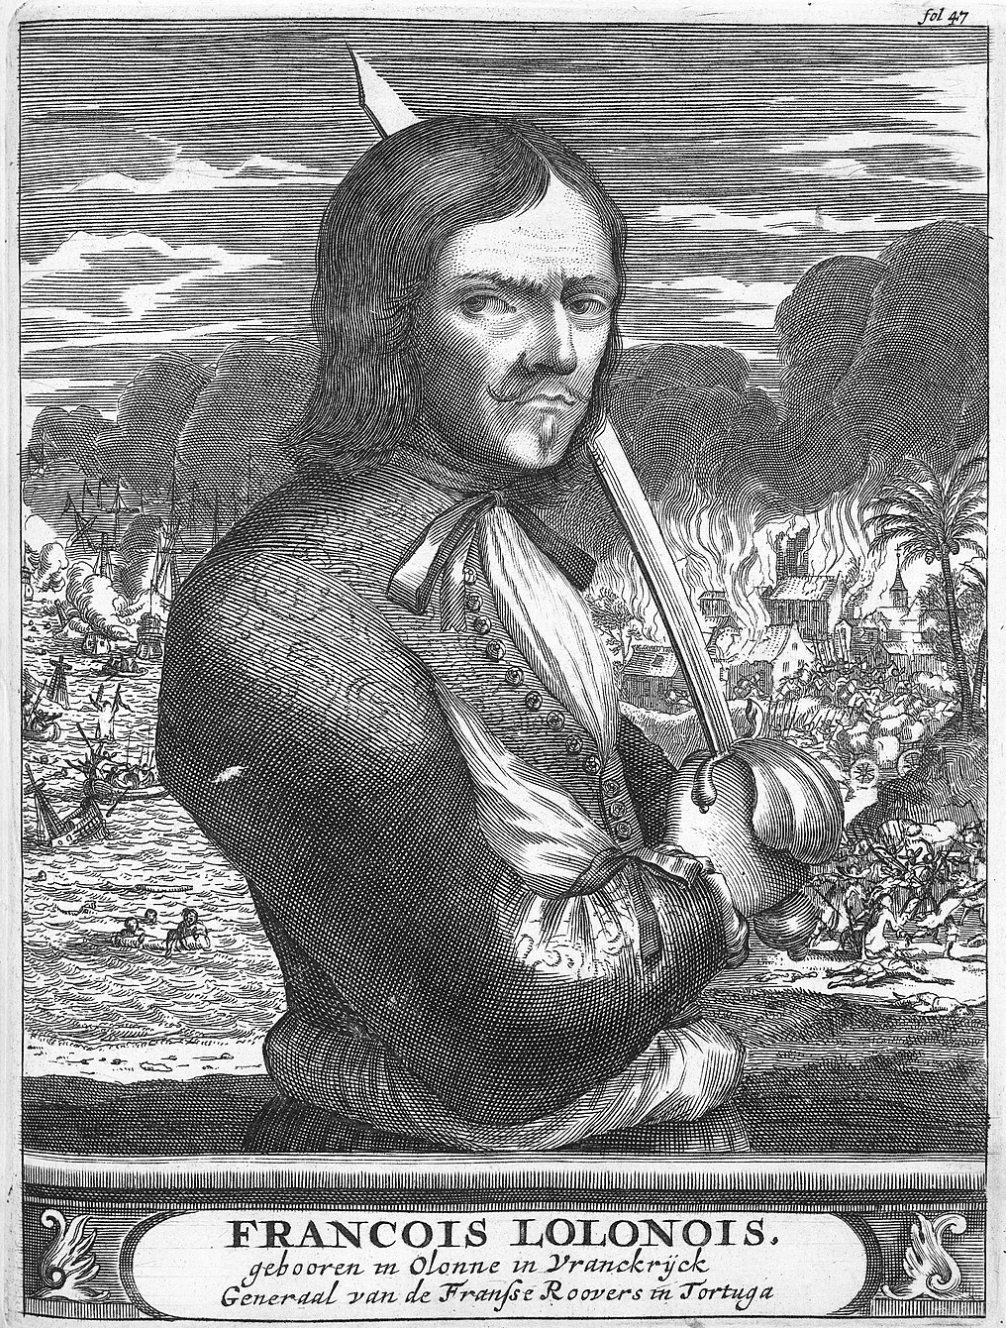 “[Francois L'Ollonias] hated the Spanish, because they killed his crew and the only reason he survived was because he played dead, so he attacked the Spanish at every opportunity. One day the Spanish laid an ambush for him and desperate to escape, he took some Spanish prisoners he had onboard, cut out one of their hearts, took a bite and then said that the same thing would happen to the rest of them if they didn't help him escape.”